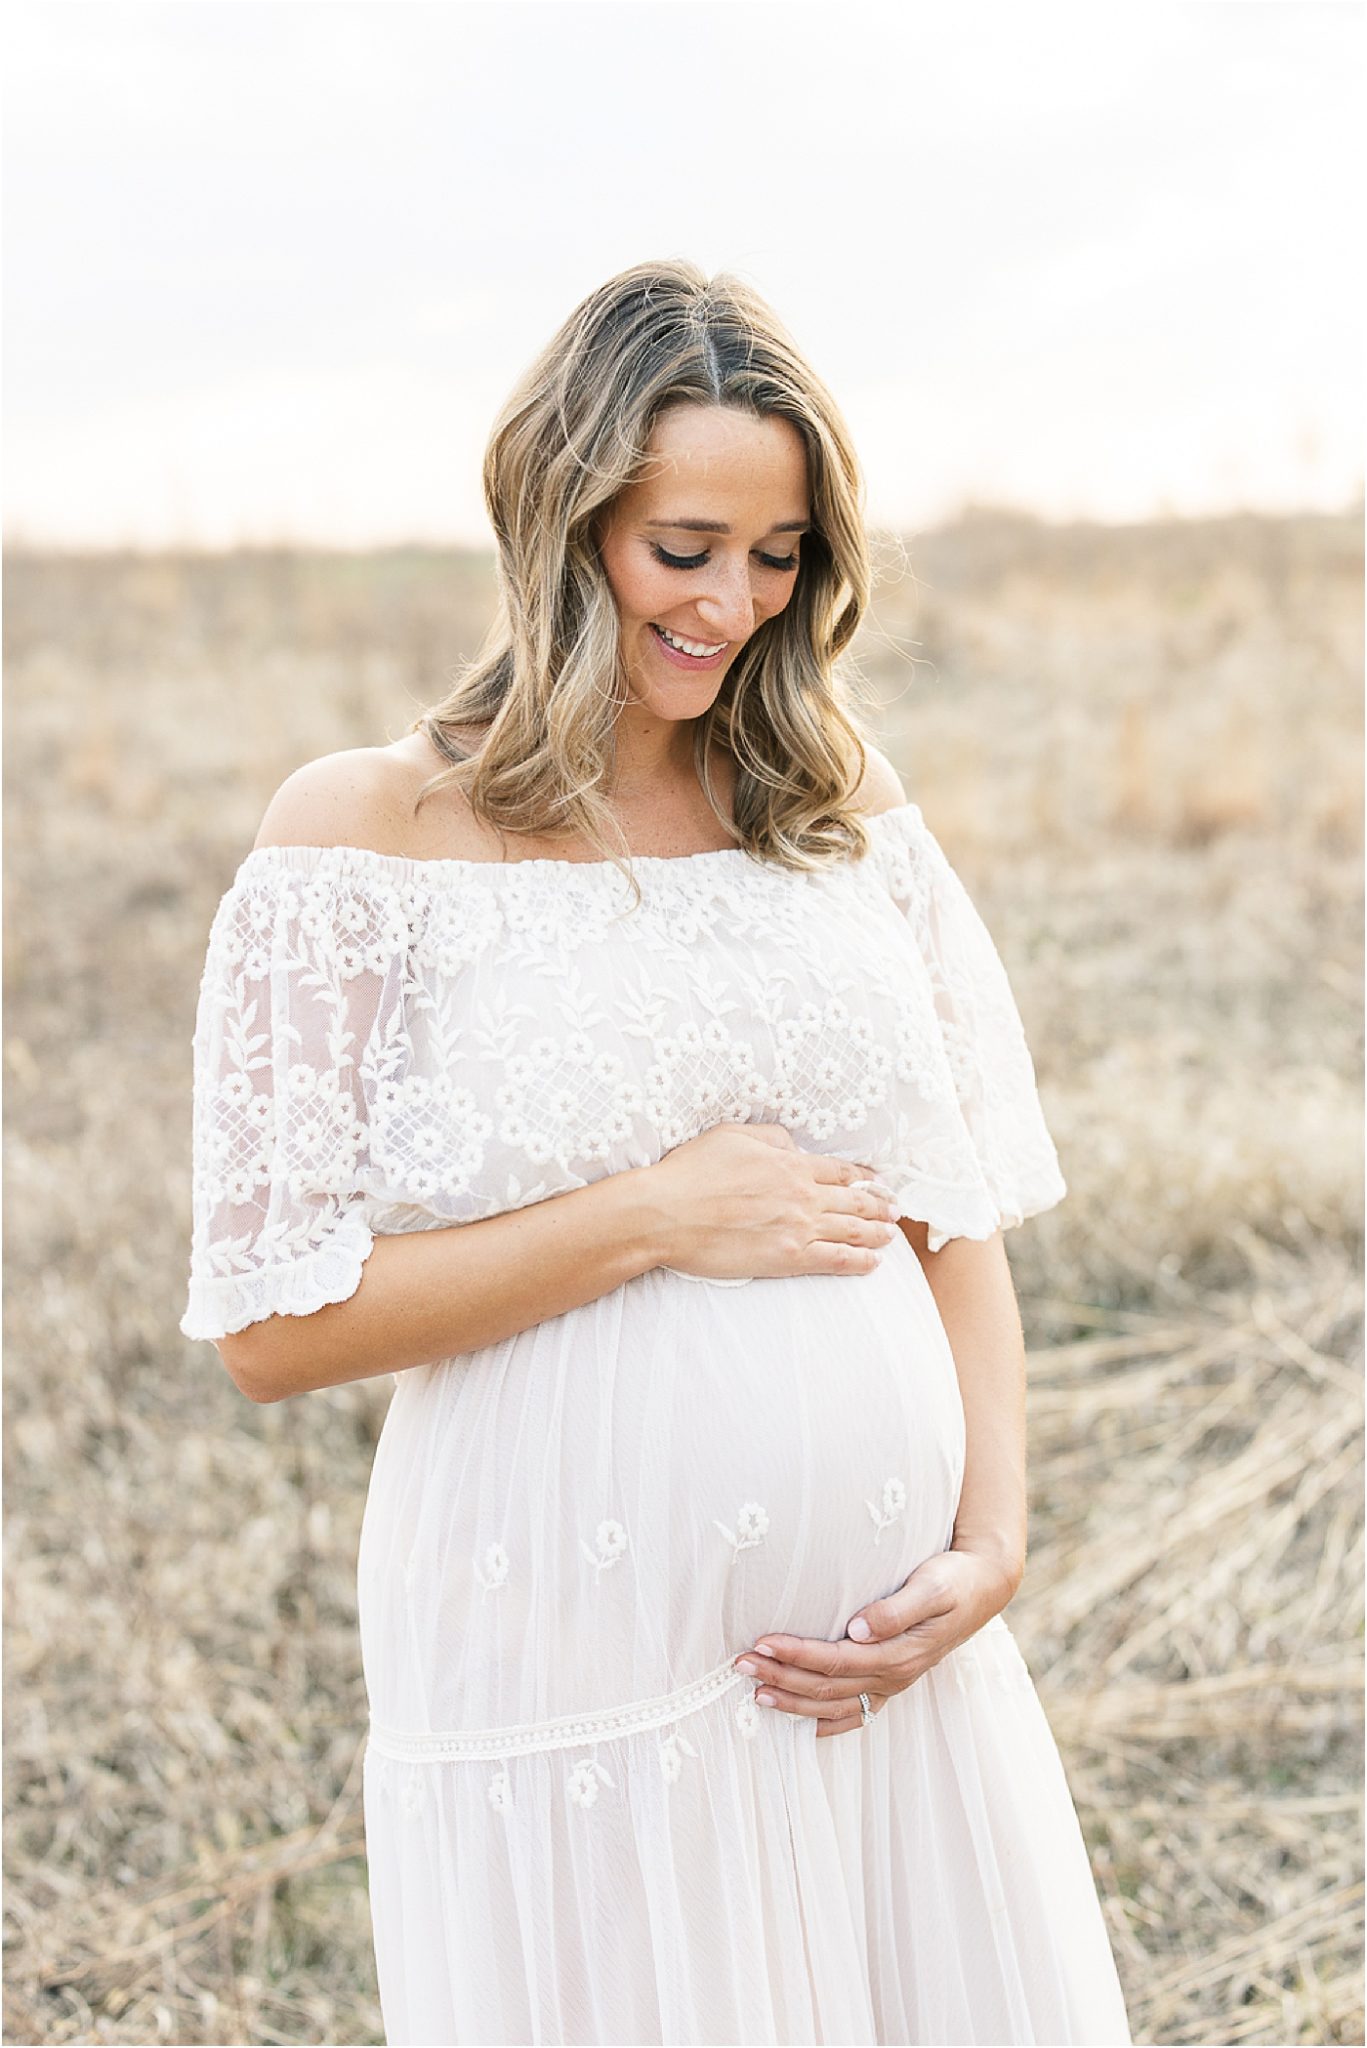 Pregnant mama wearing a beautiful lace dress. Photo by Broad Ripple IN Maternity Photographer, Lindsay Konopa Photography.